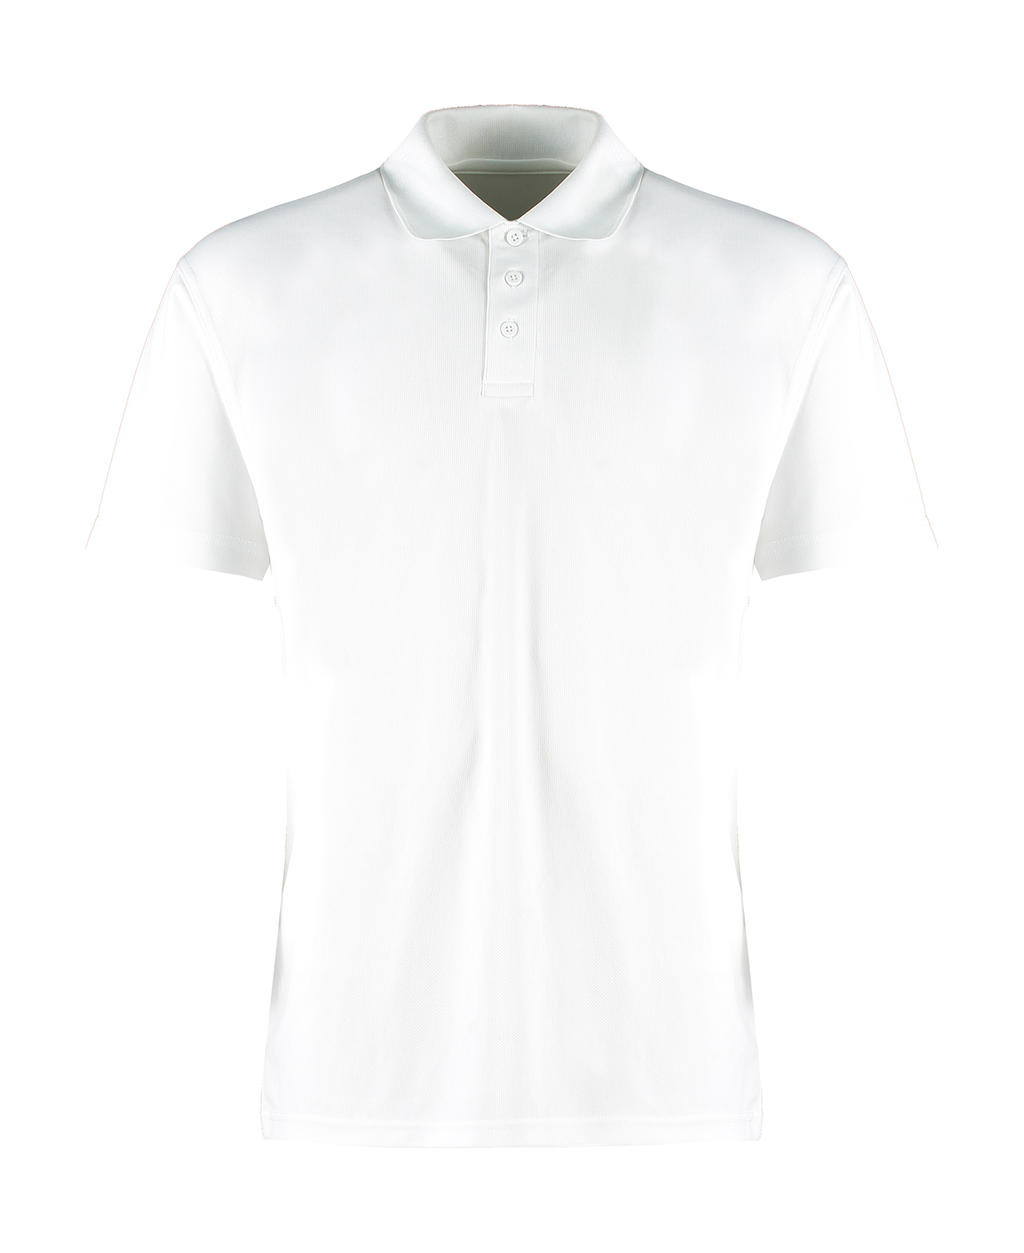 542.11 / Regular Fit Cooltex® Plus Micro Mesh Polo